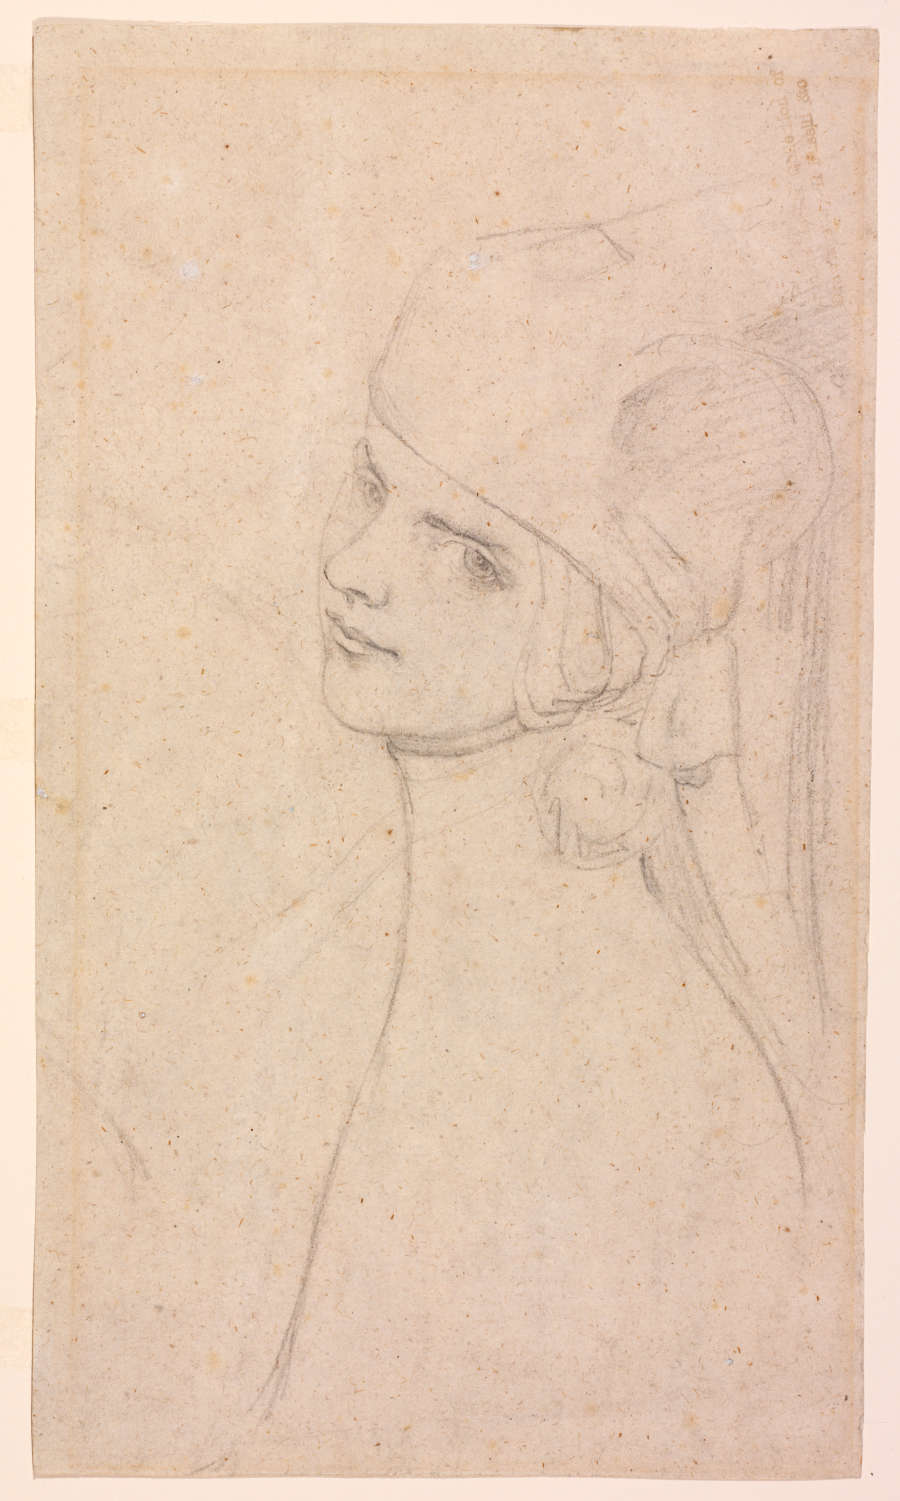 A black chalk line drawing of a woman in profile. With her head slightly tilted towards the viewer, she stares skeptically at us and wears an elaborate hat.